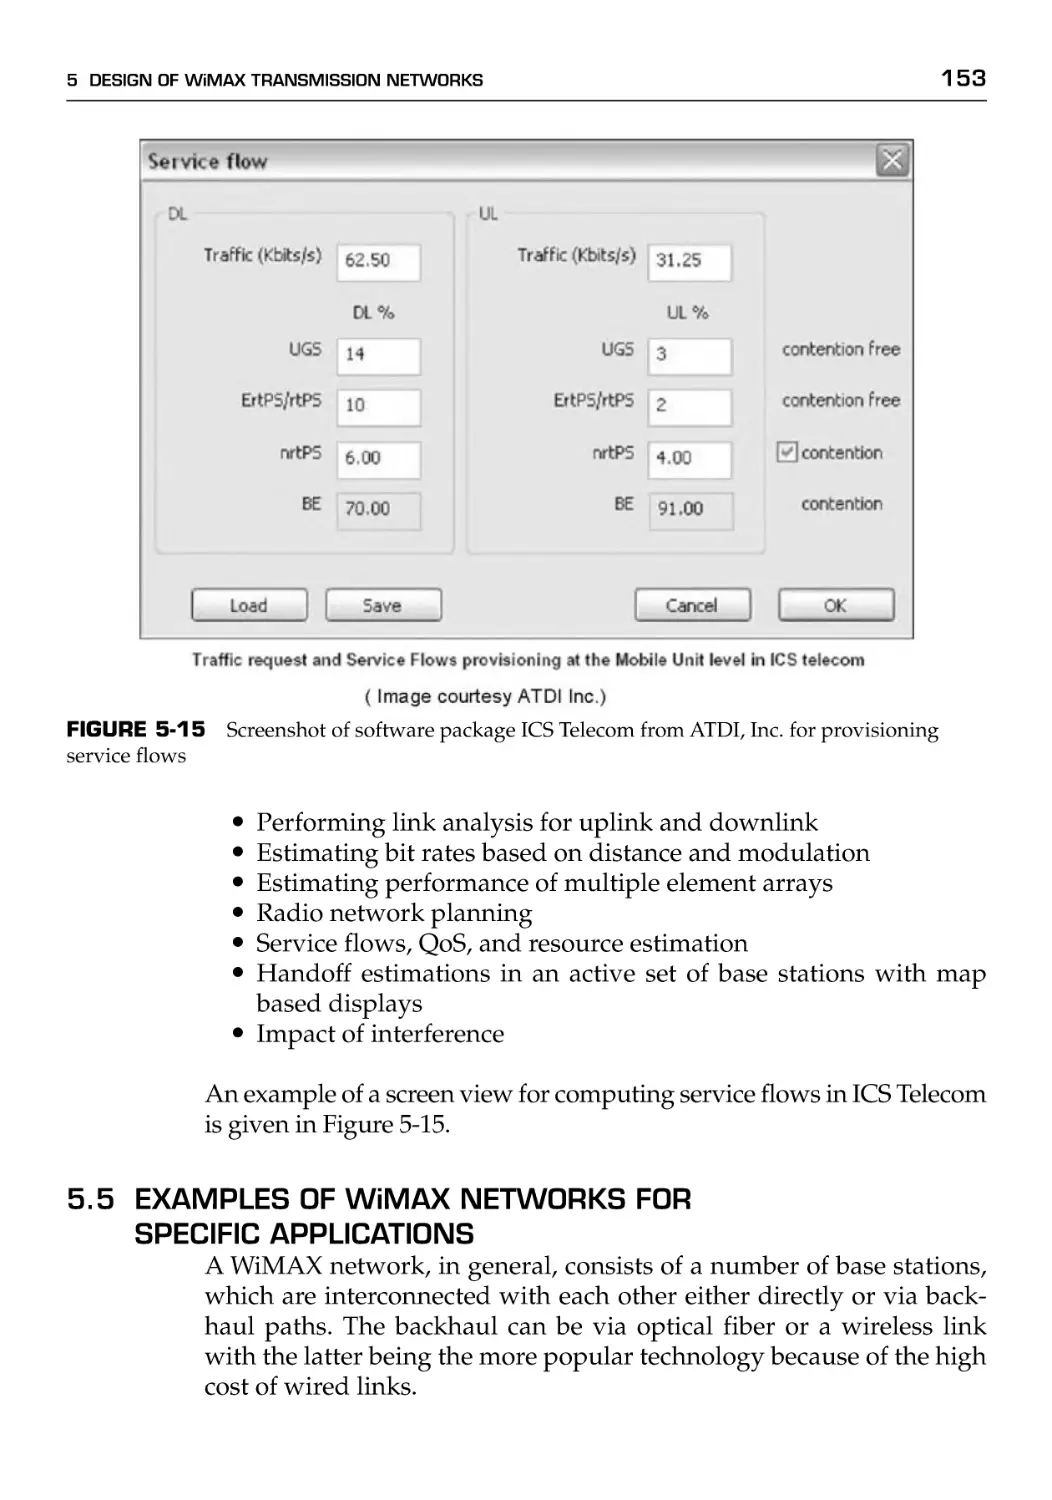 5.5 Examples of WiMAX Networks for Specific Applications